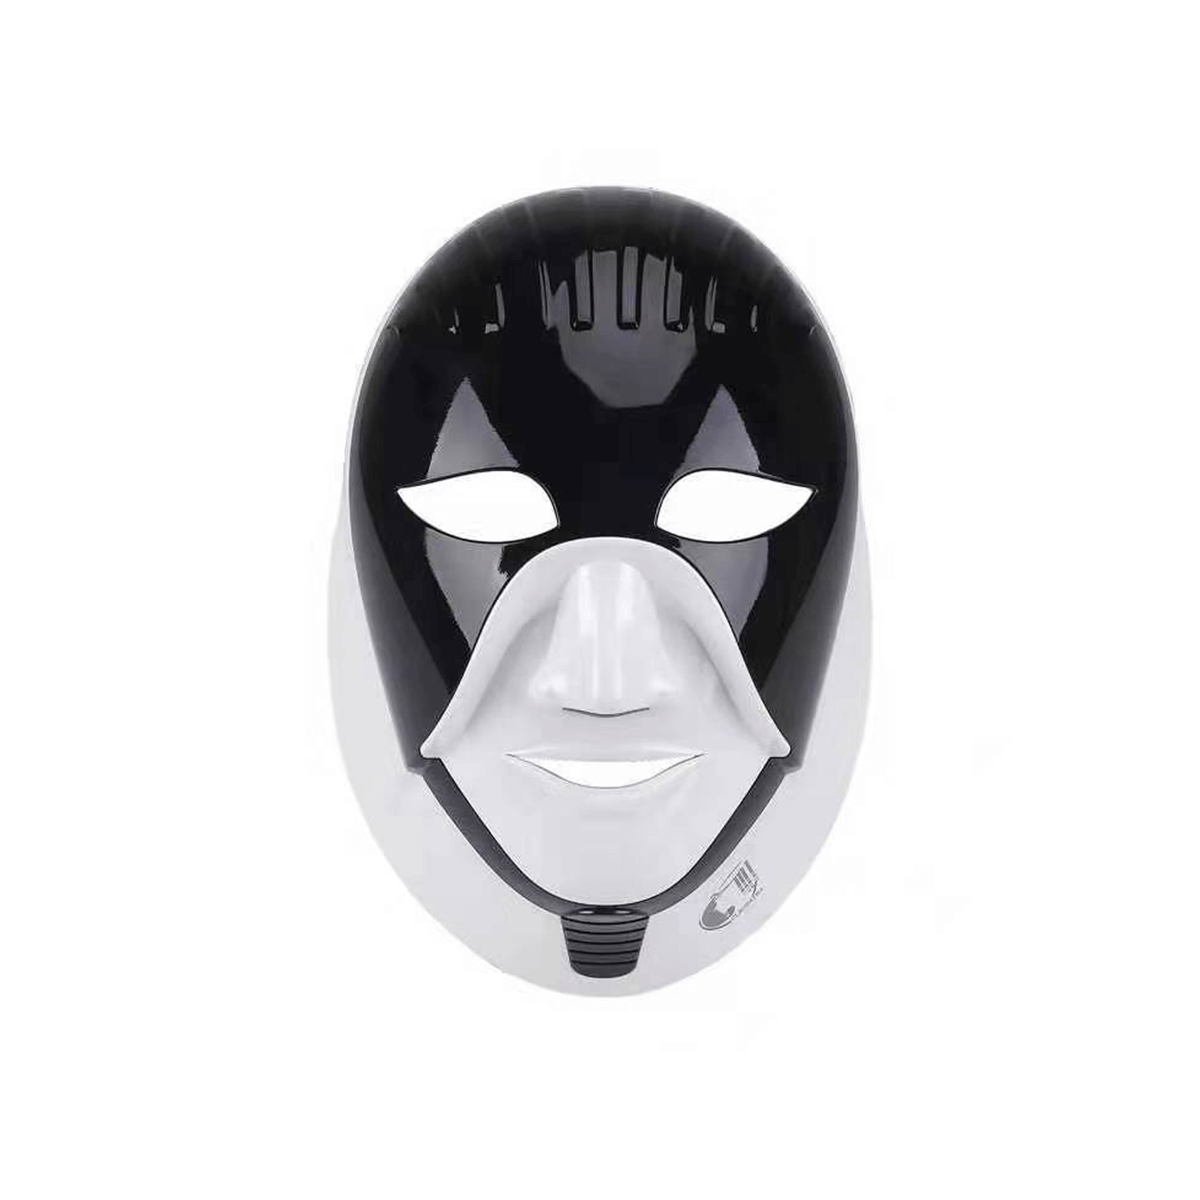 7 Colorful Light Wave Beauty Mask New Cleopatra LED Electric Facial Spa Mask